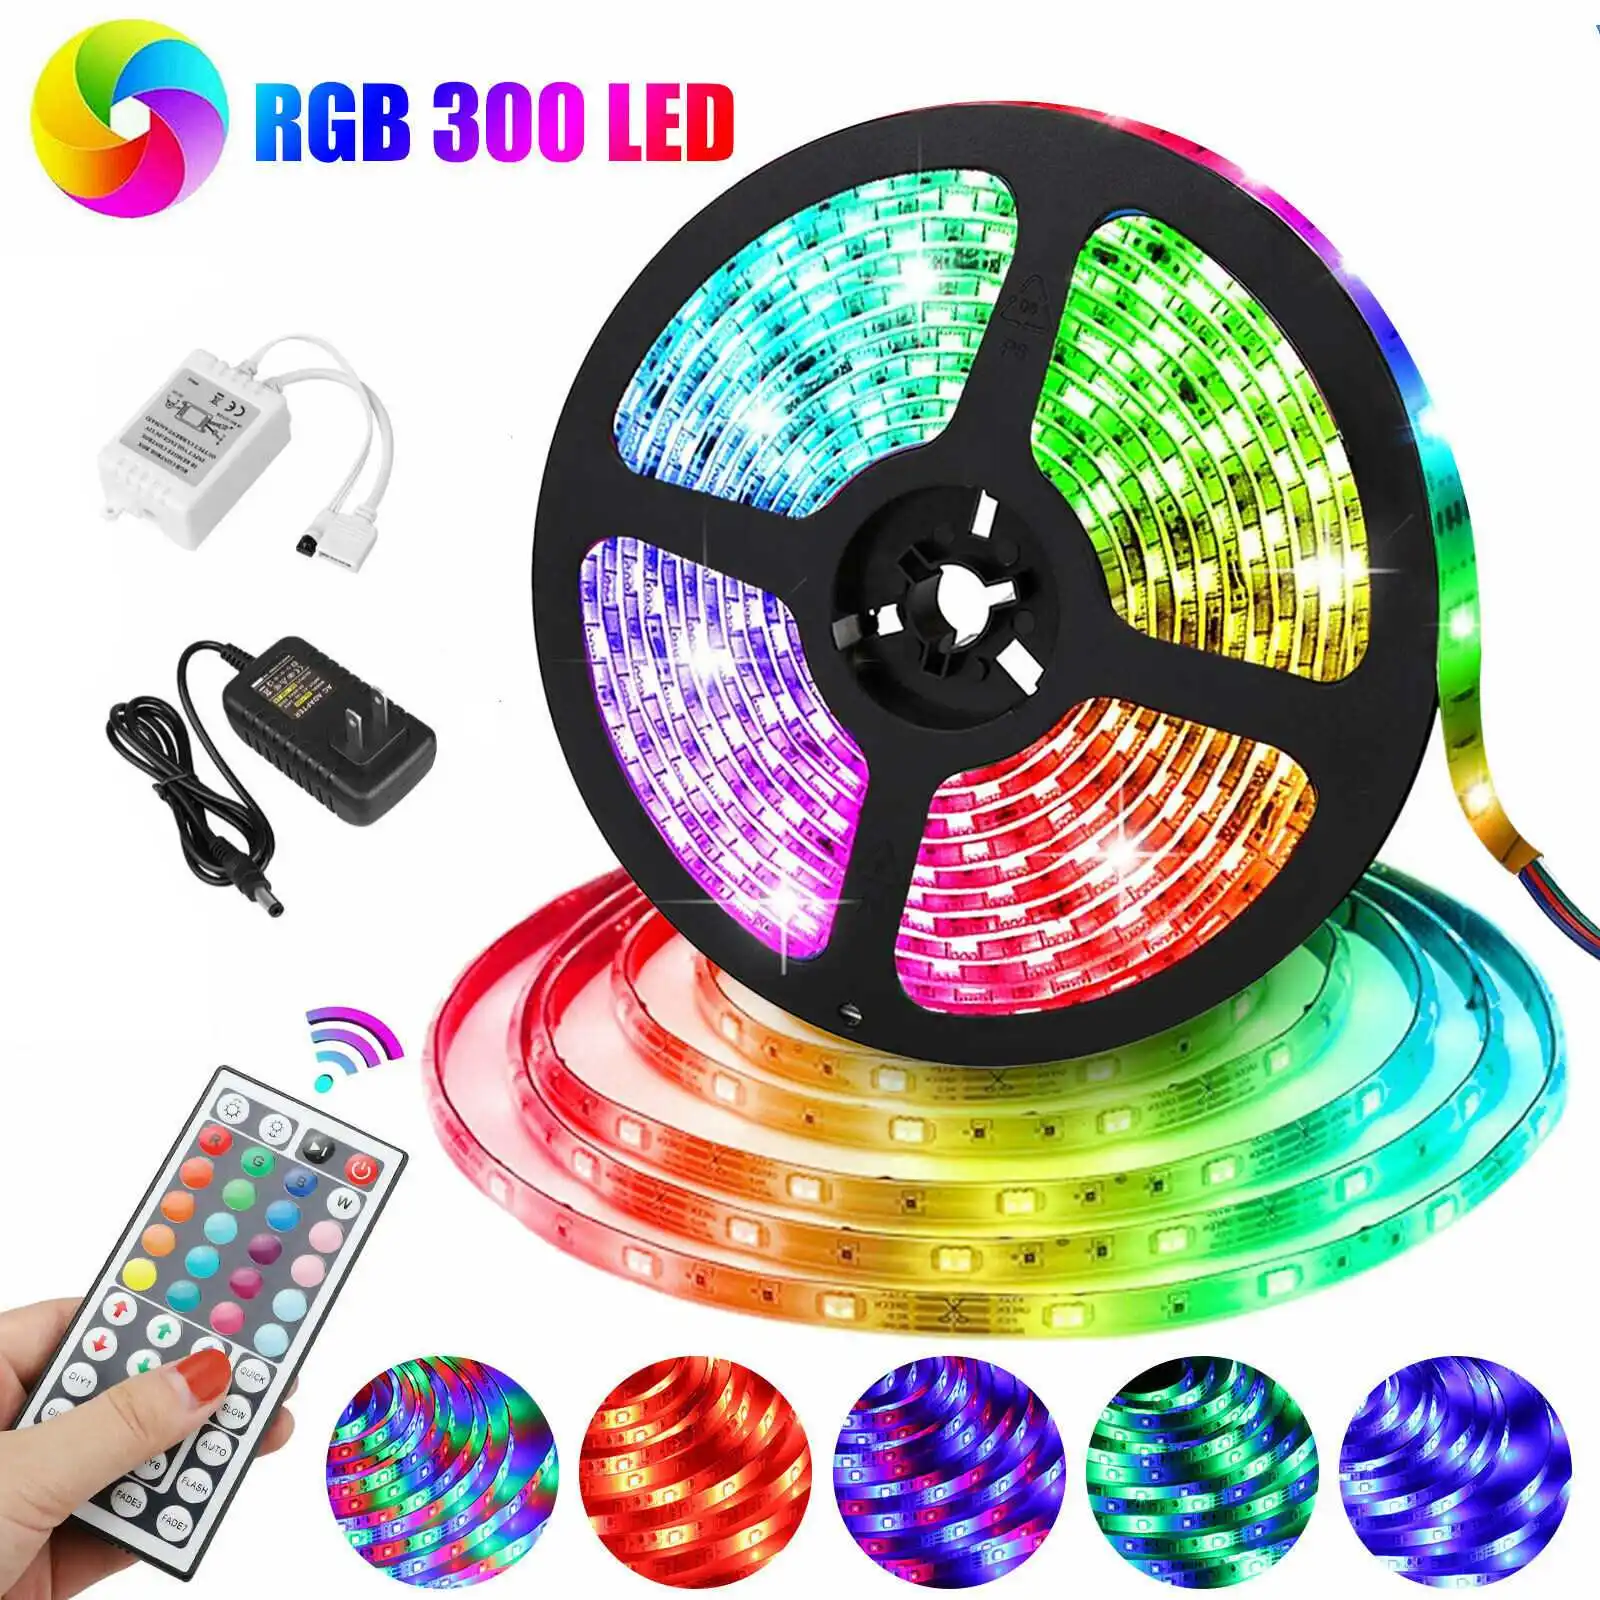 

LED Strip Light RGB 72W 2835 Flexible Ribbon Remote Control 12V Led Lights Strip With 44 Keys IP65 Waterproof Tape Diode+Adapter